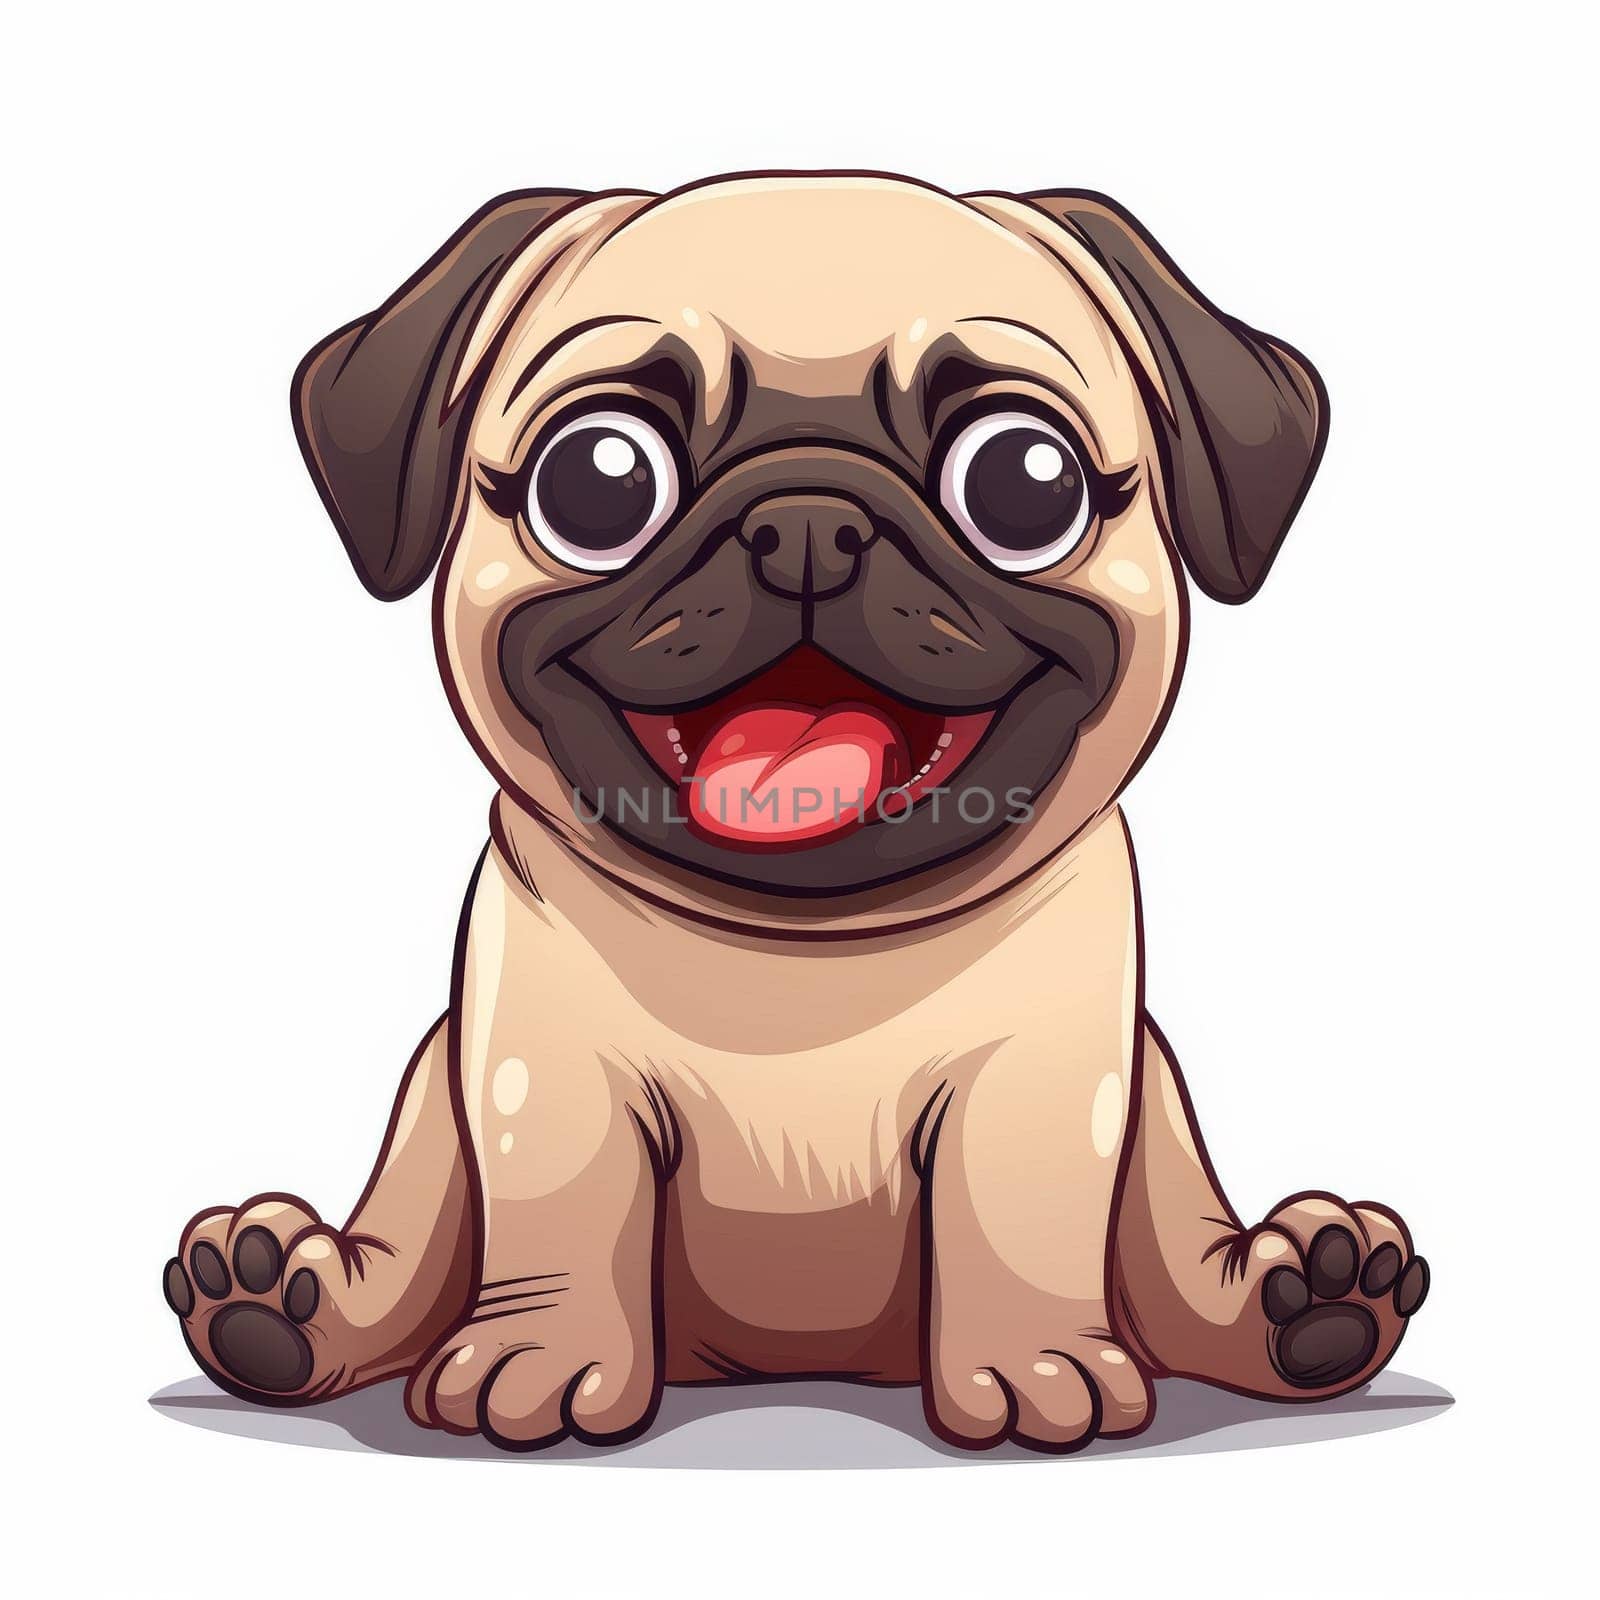 A cartoon dog with a tongue sticking out. It is sitting on a white background. The dog has a cute and playful expression on its face